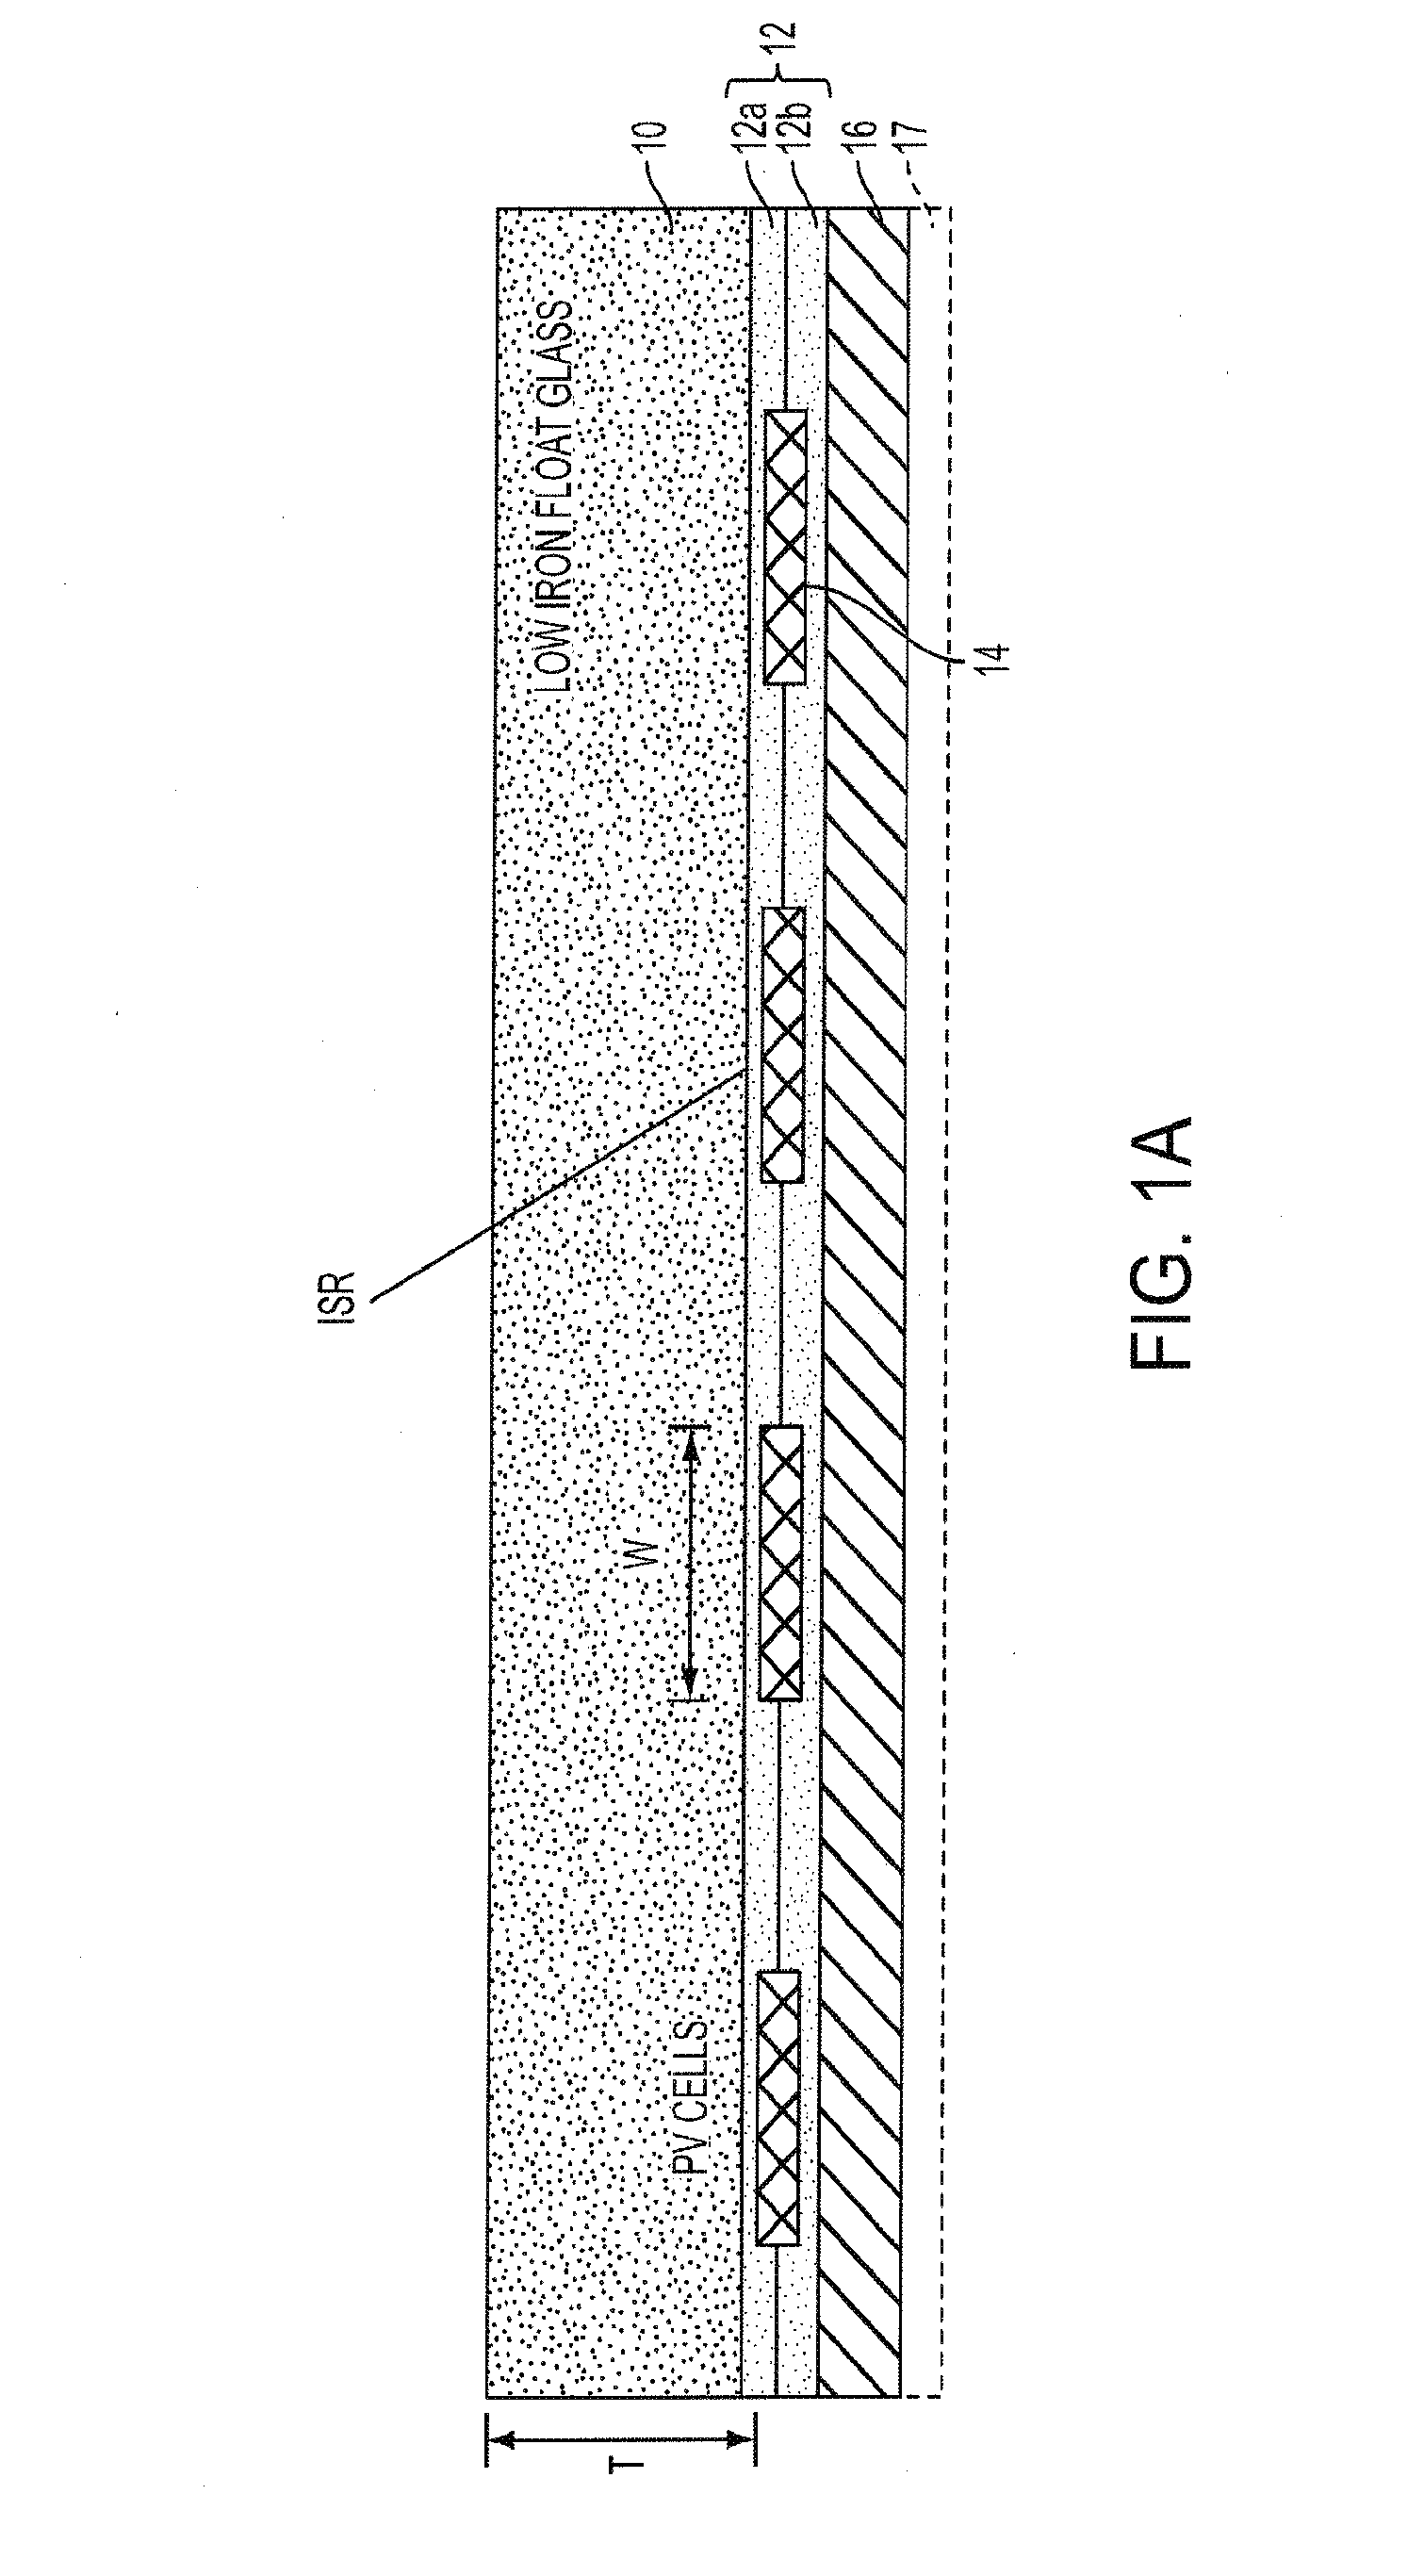 Luminescent solar concentrator apparatus, method and applications